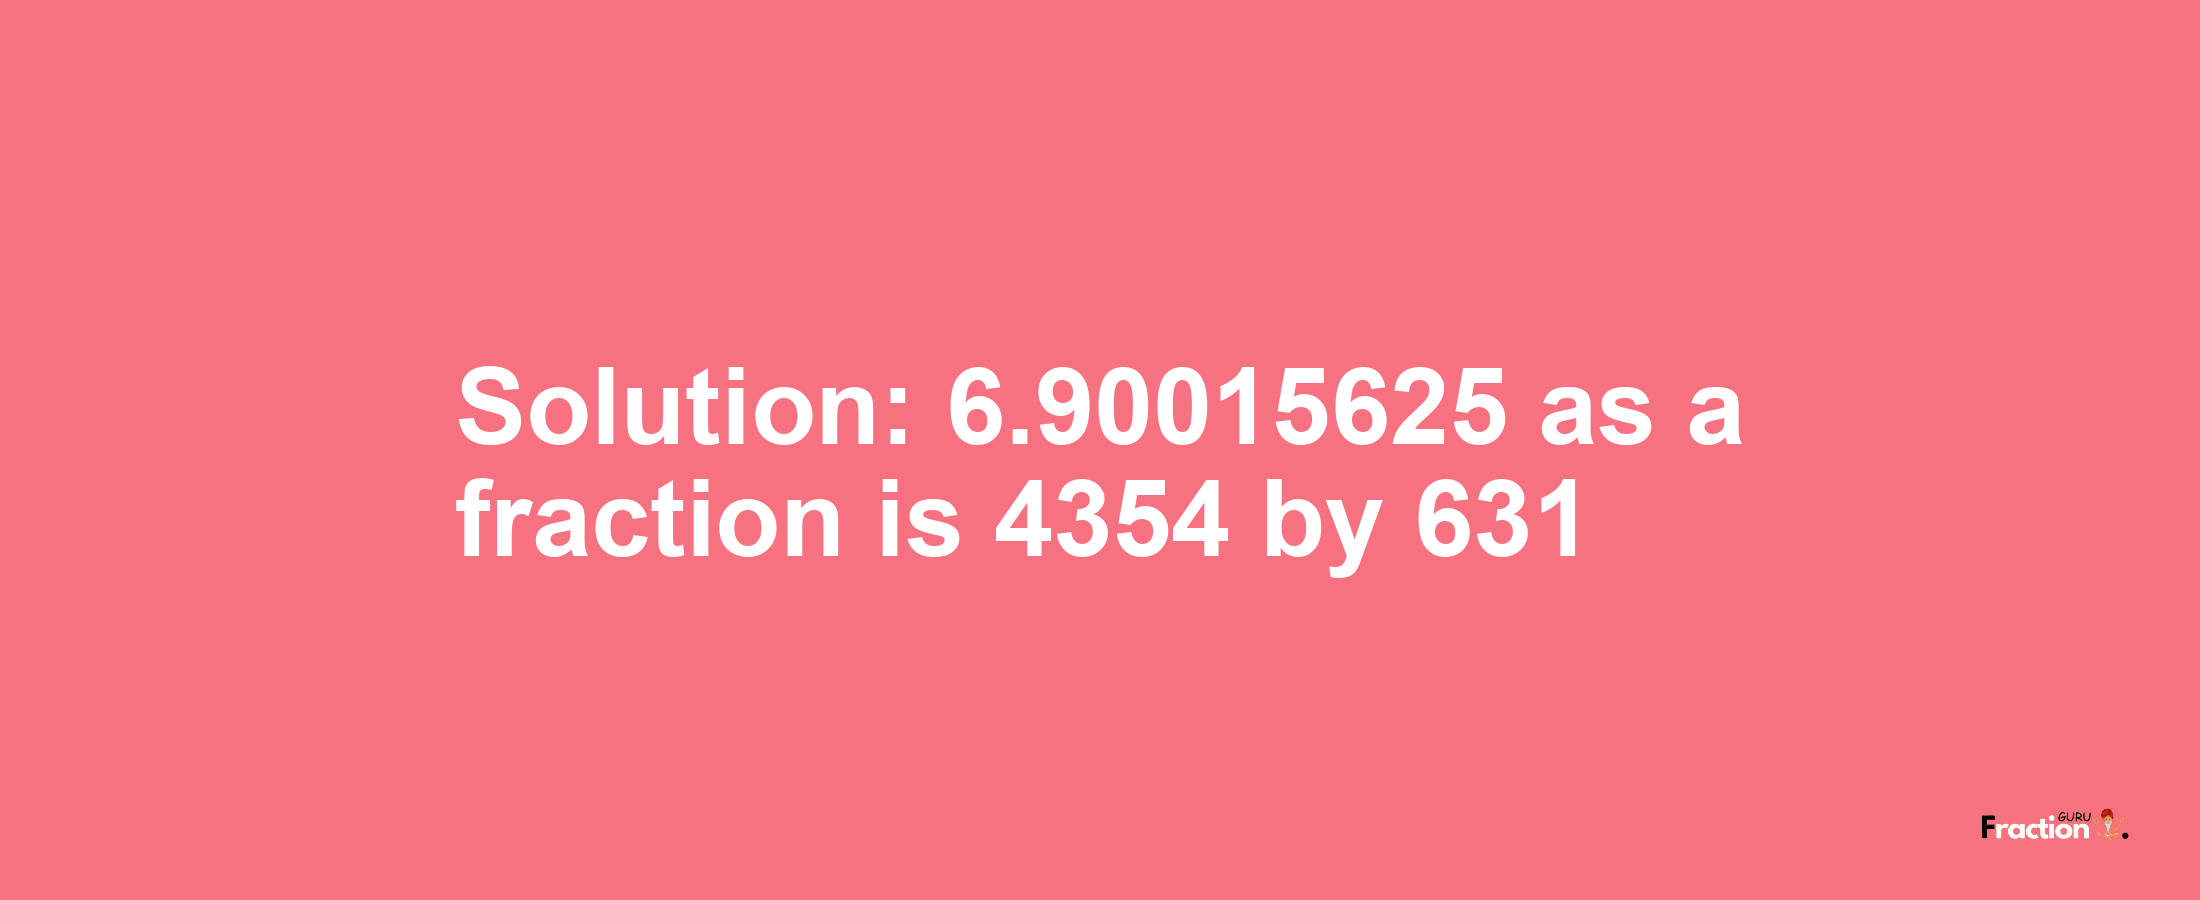 Solution:6.90015625 as a fraction is 4354/631